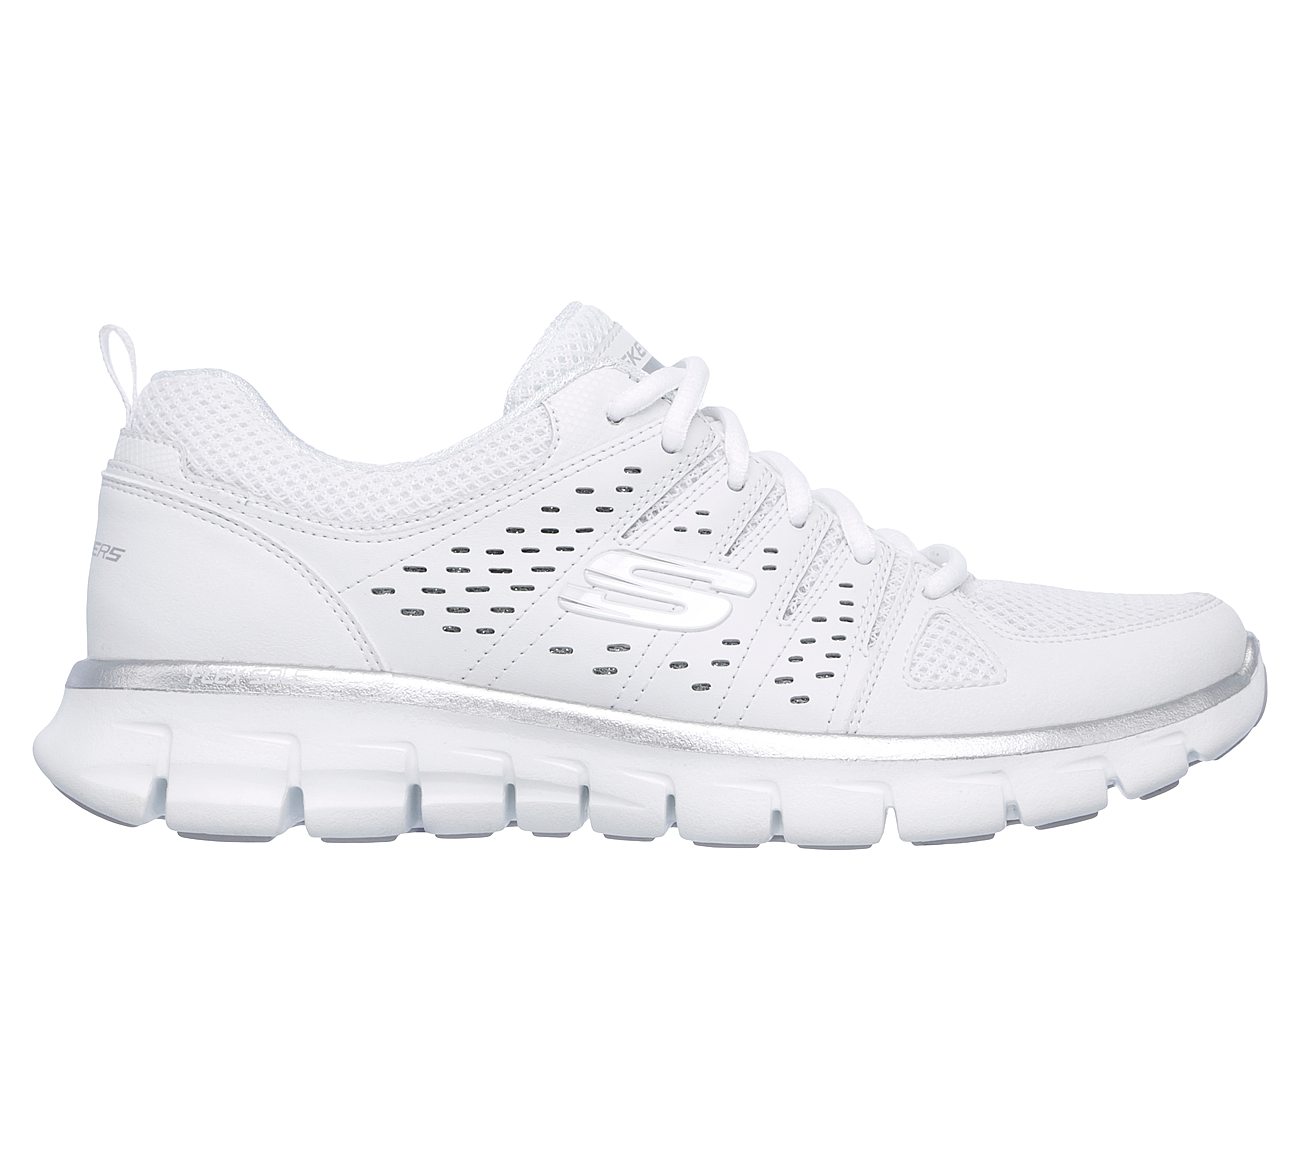 Buy SKECHERS Synergy - Look Book Sport Shoes only $60.00